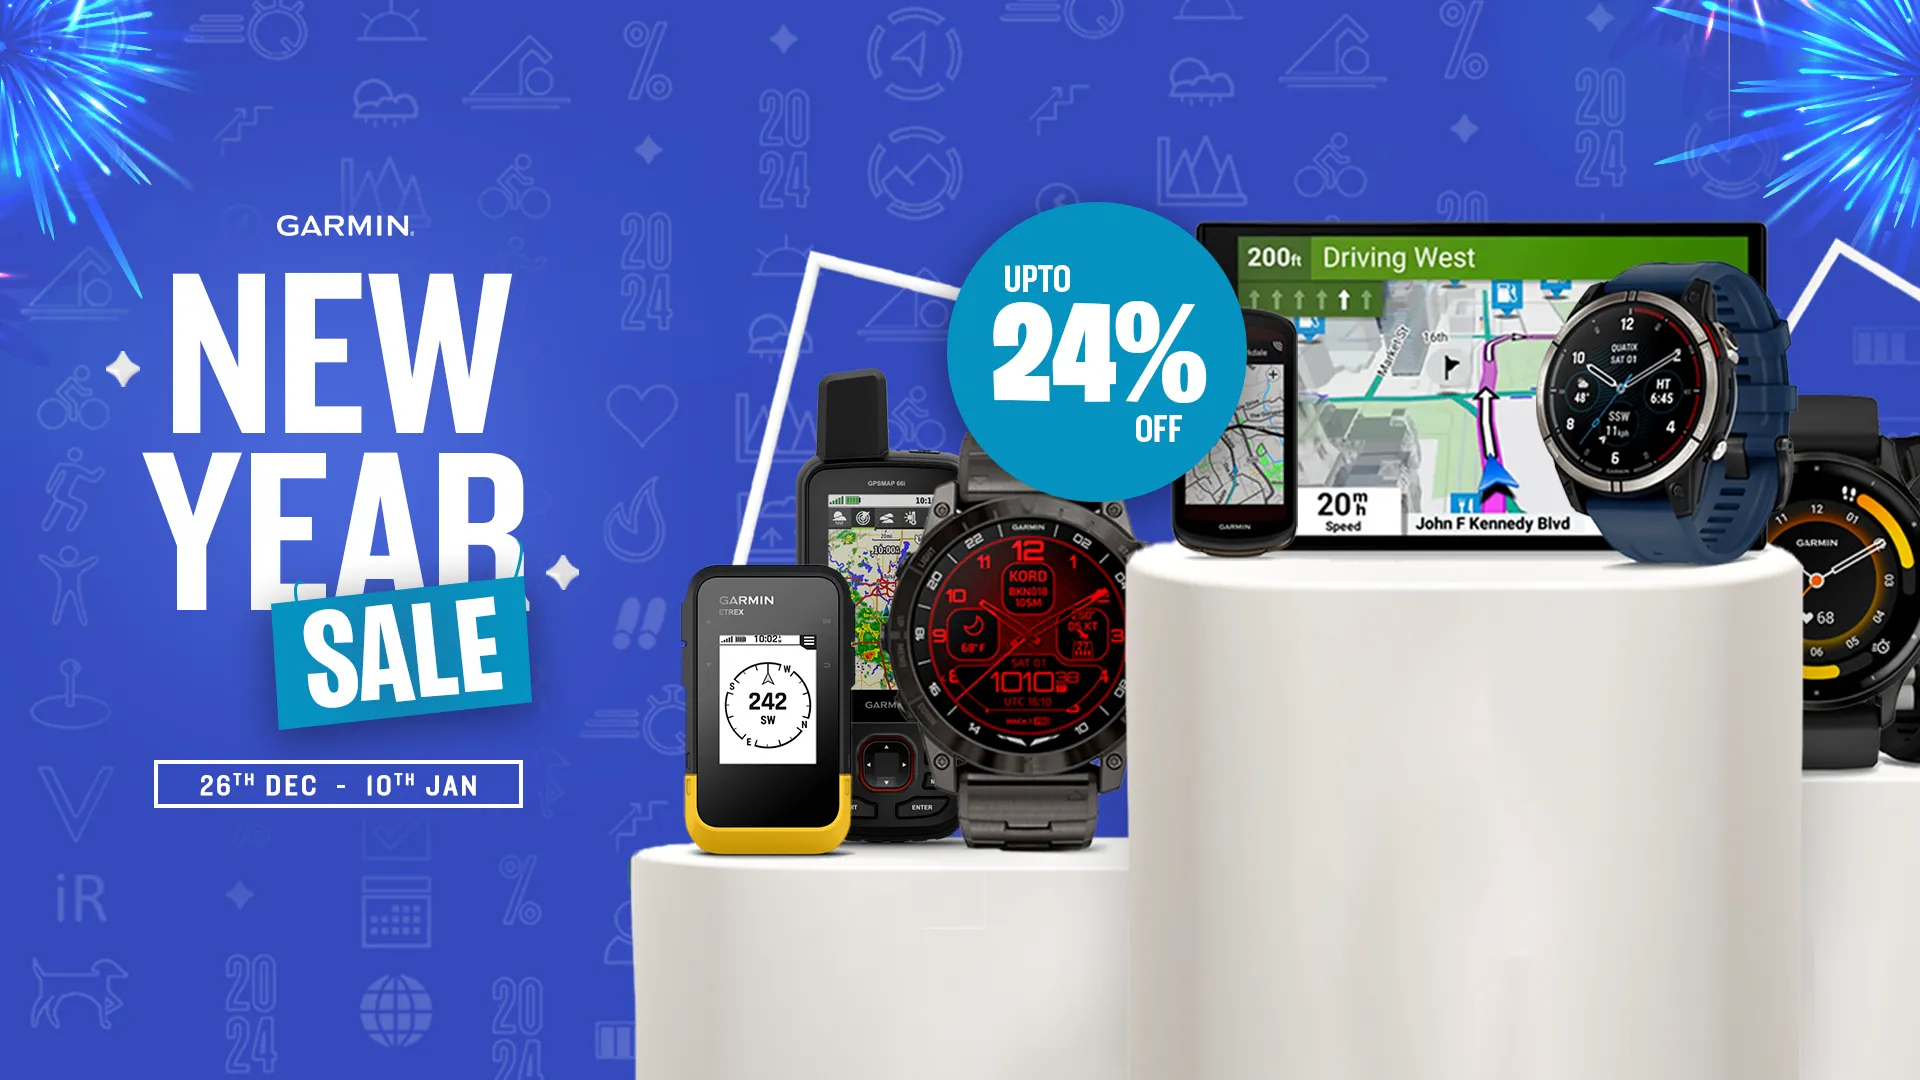 Ring in the New Year with Exciting Savings: Garmin’s New Year Sale Offers Up to 24% Off!